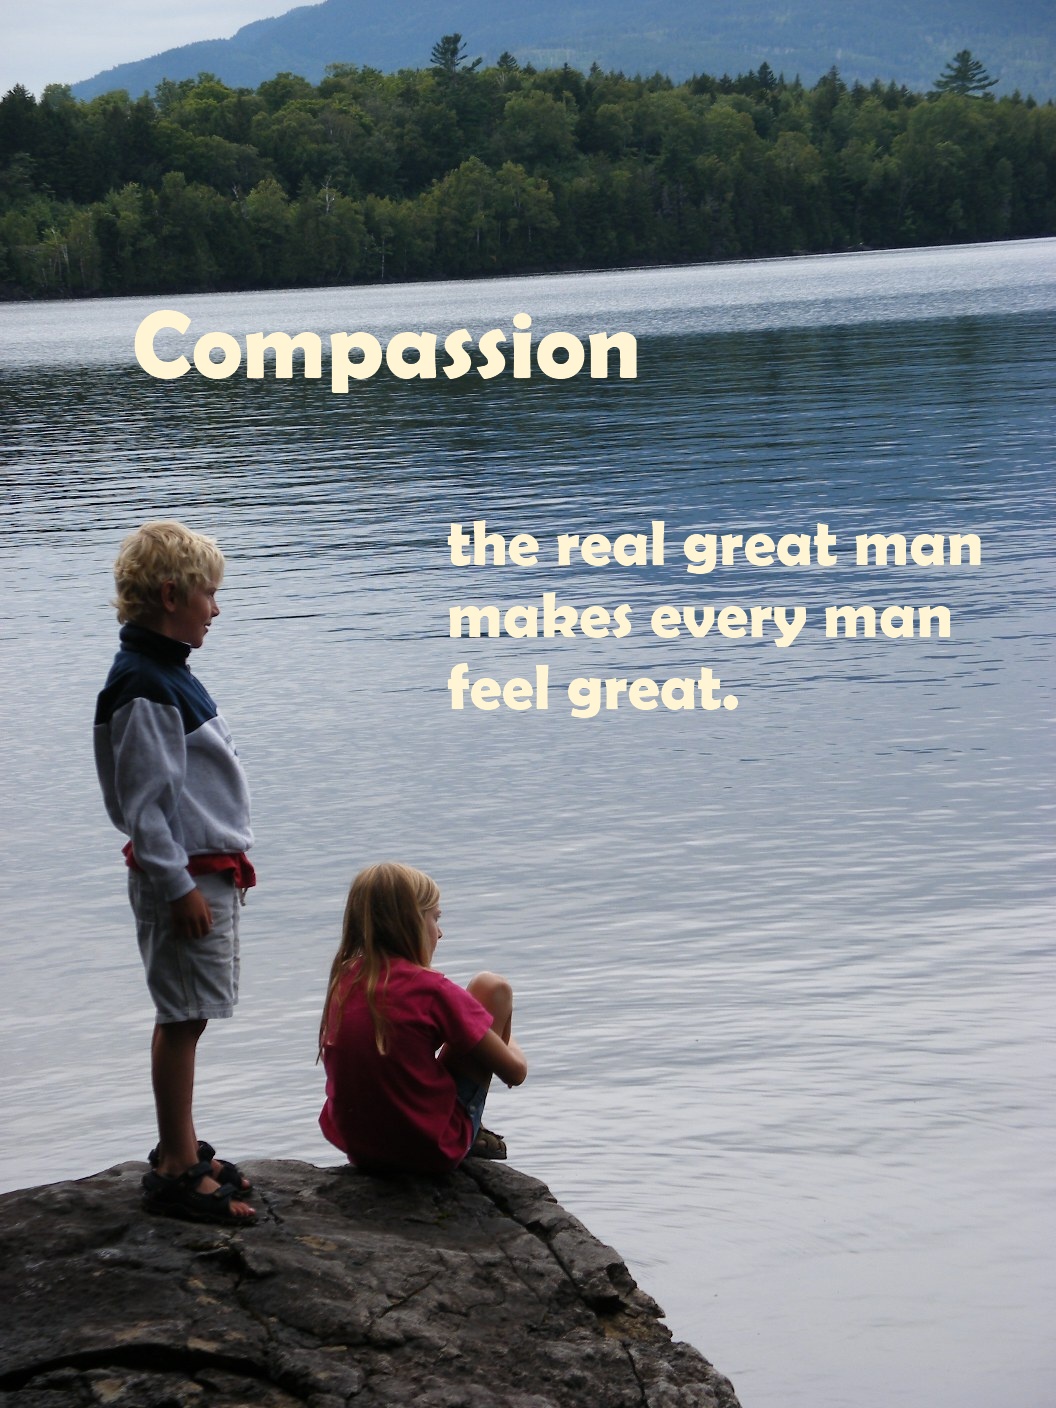 Compassion - The real great man makes every man feel great.